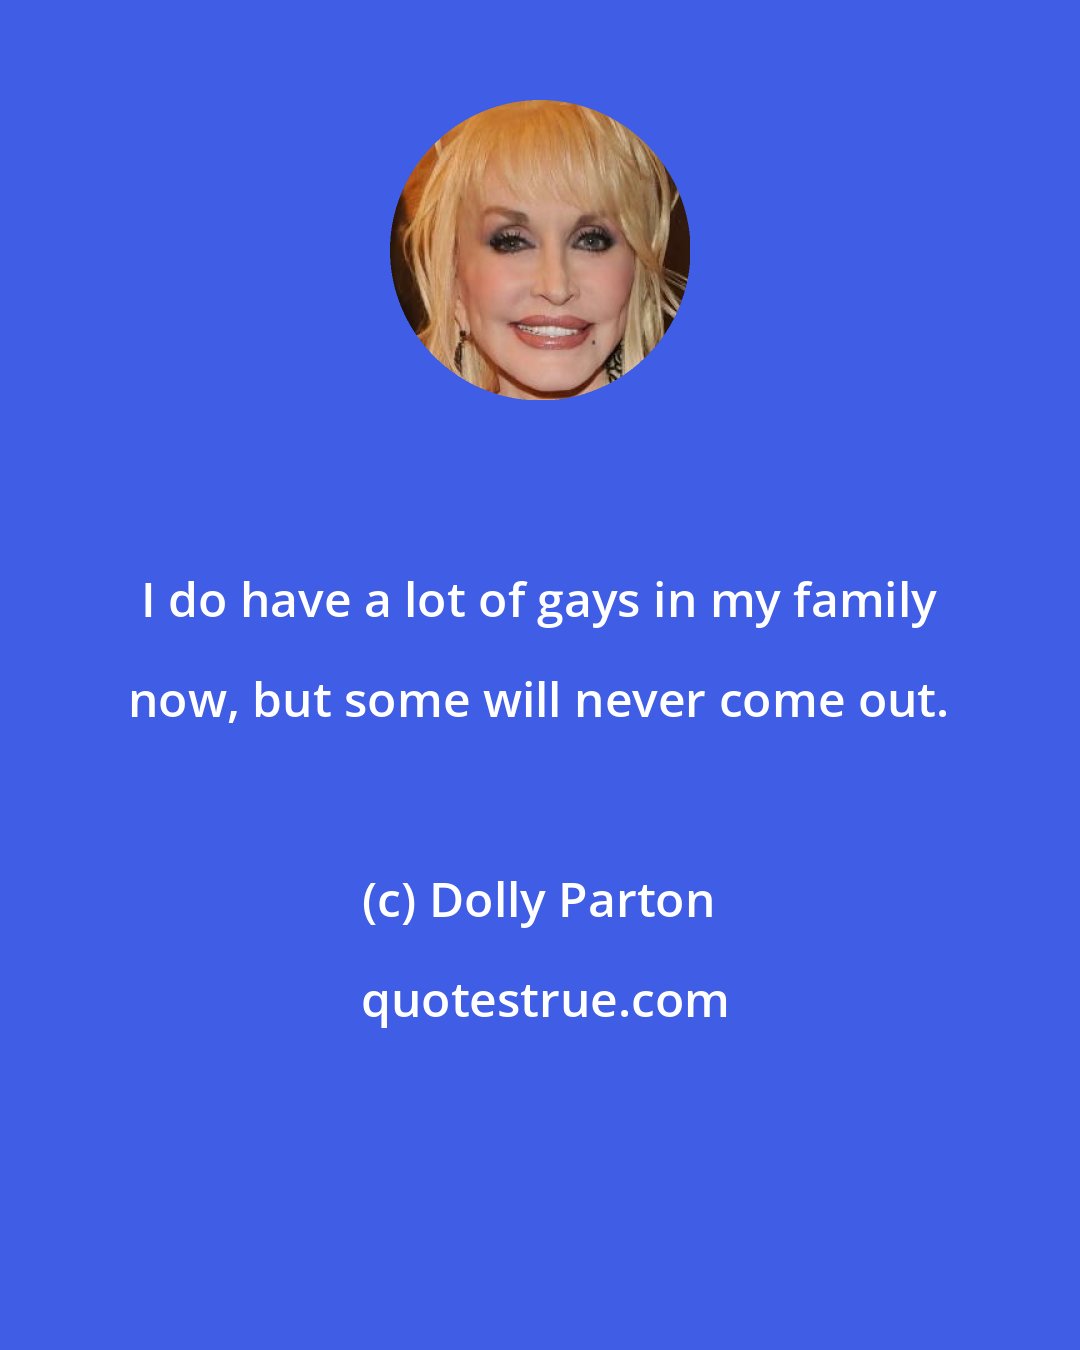 Dolly Parton: I do have a lot of gays in my family now, but some will never come out.